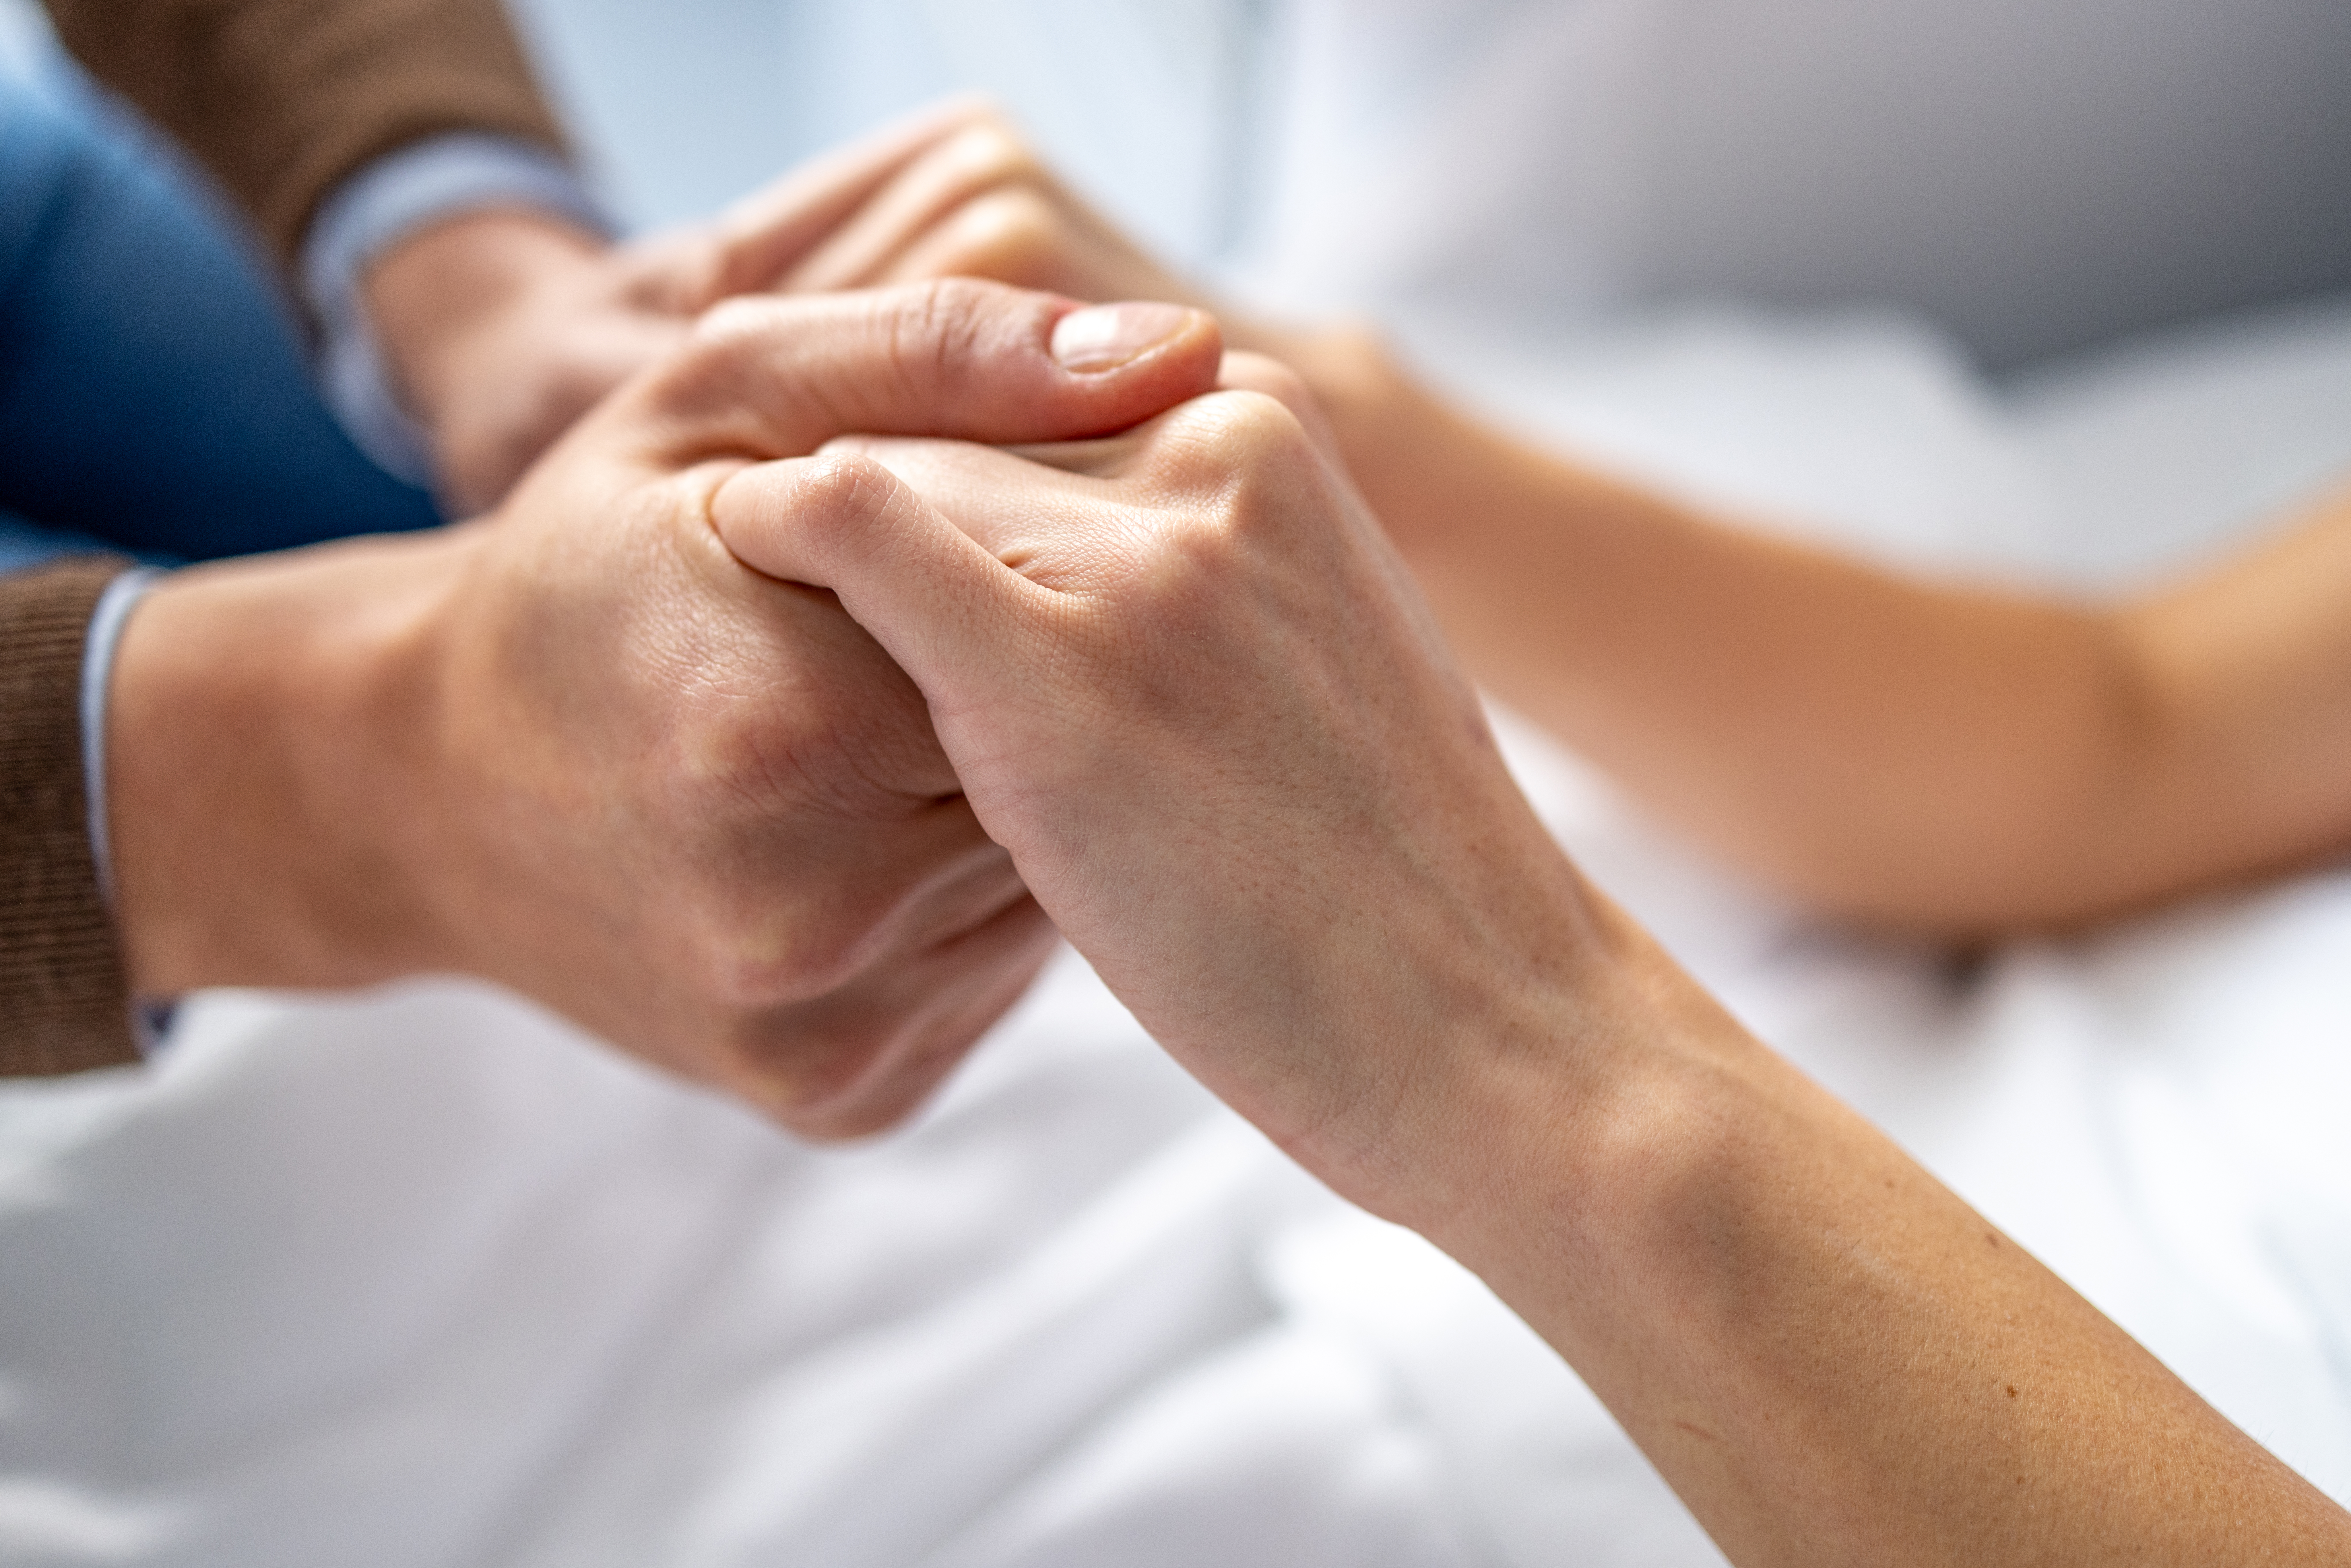 Man holding woman hand in hospital bed. | Source: Getty Images